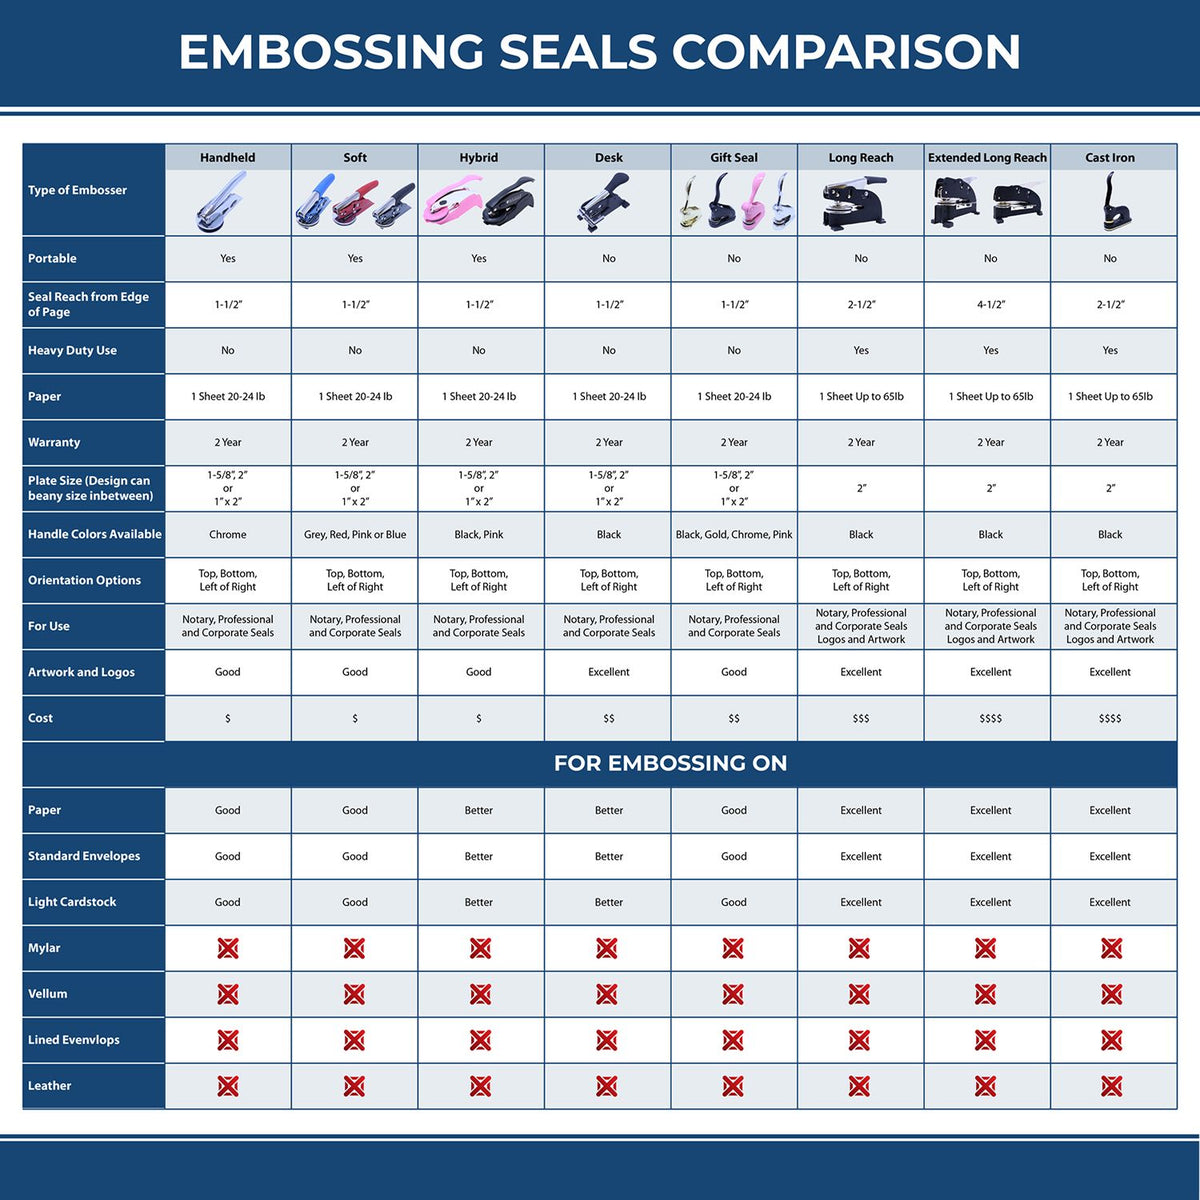 A comparison chart for the different types of mount models available for the Extended Long Reach Kansas Architect Seal Embosser.